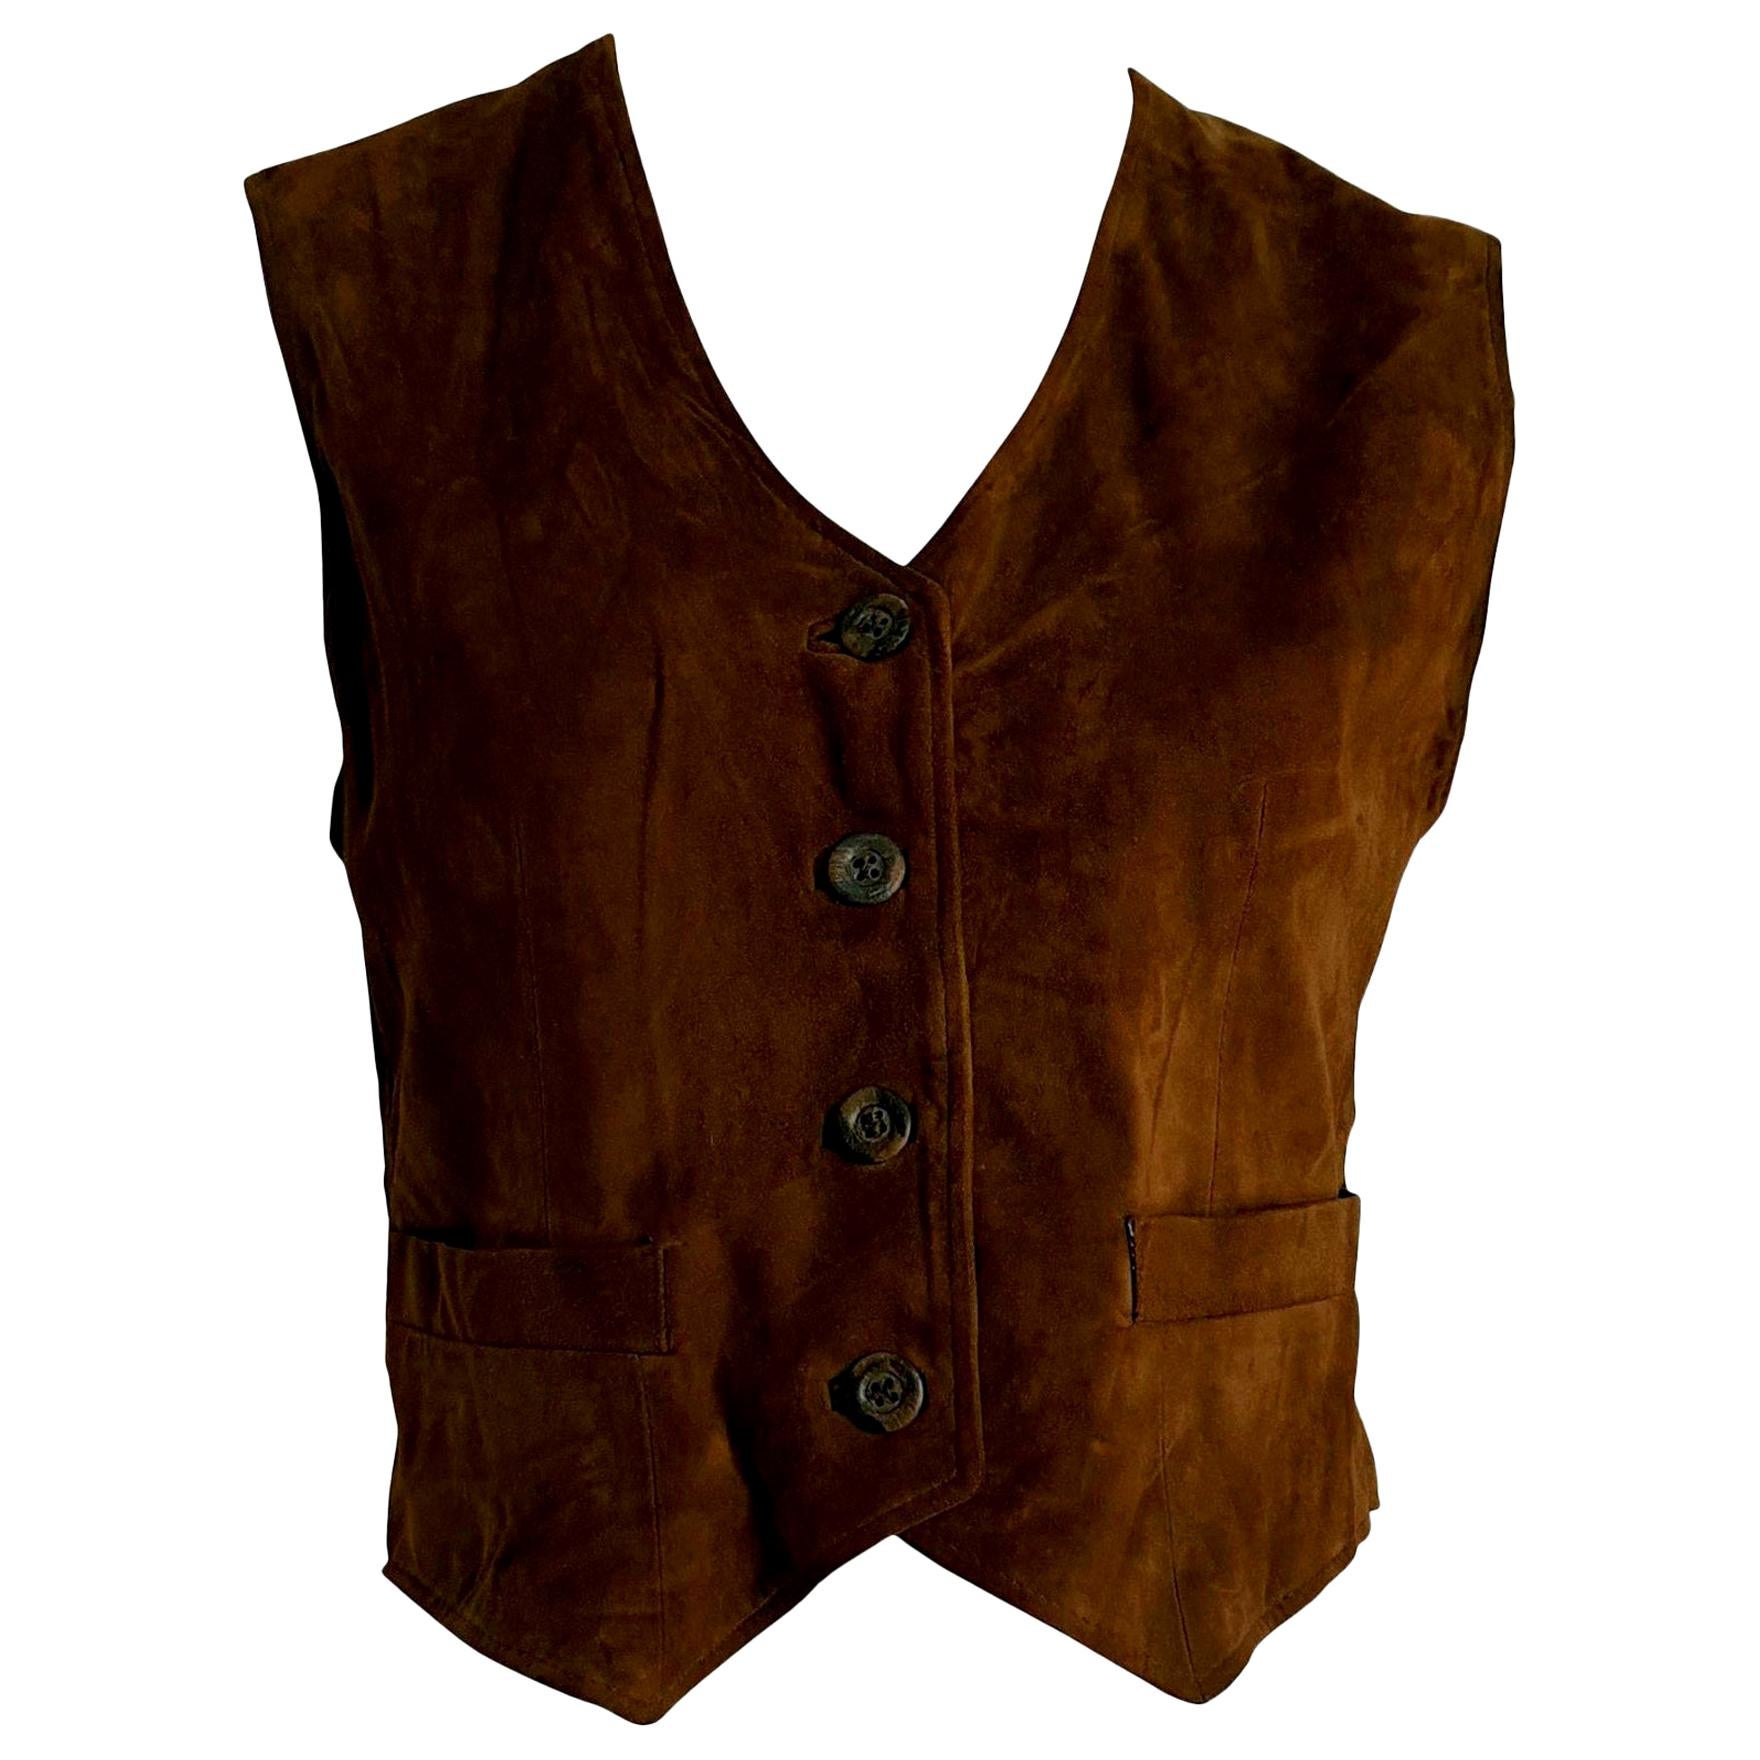 Giorgio ARMANI "New" Brown Suede 4 front Buttons Vest Gilet - Unworn For Sale